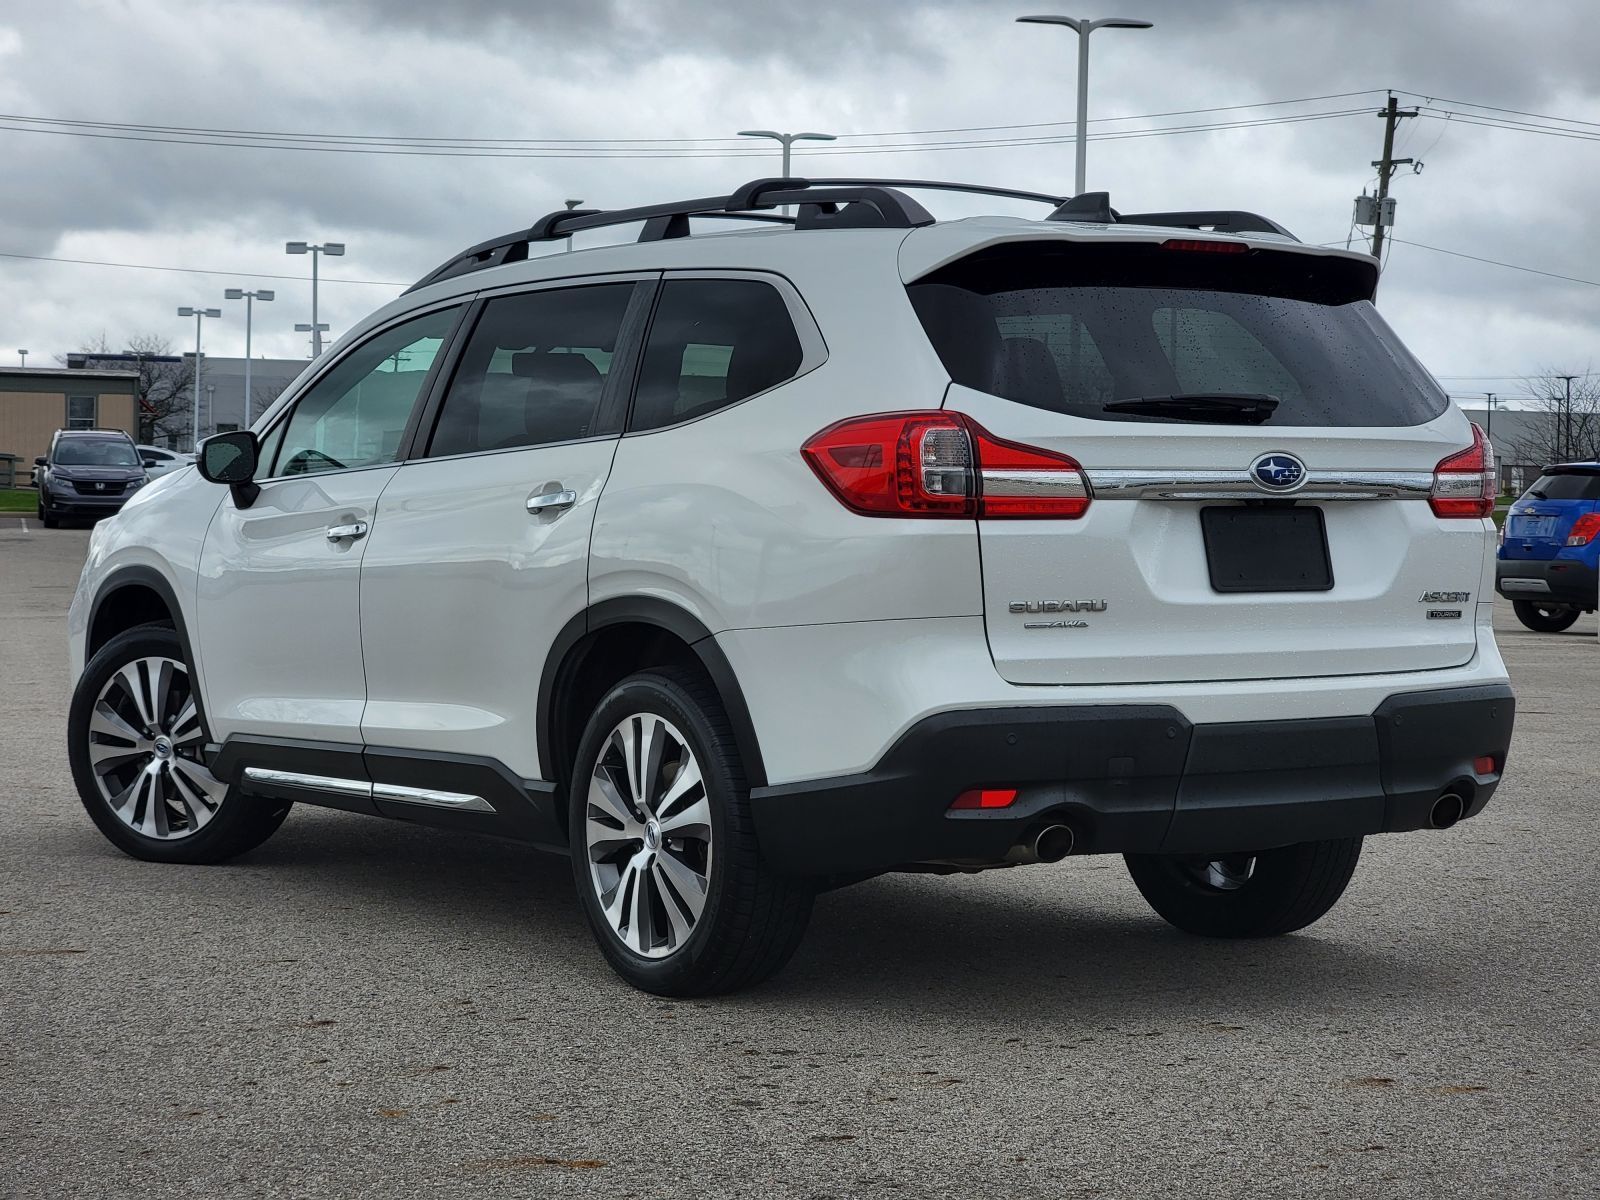 Used, 2019 Subaru Ascent Touring, White, G0131A-14